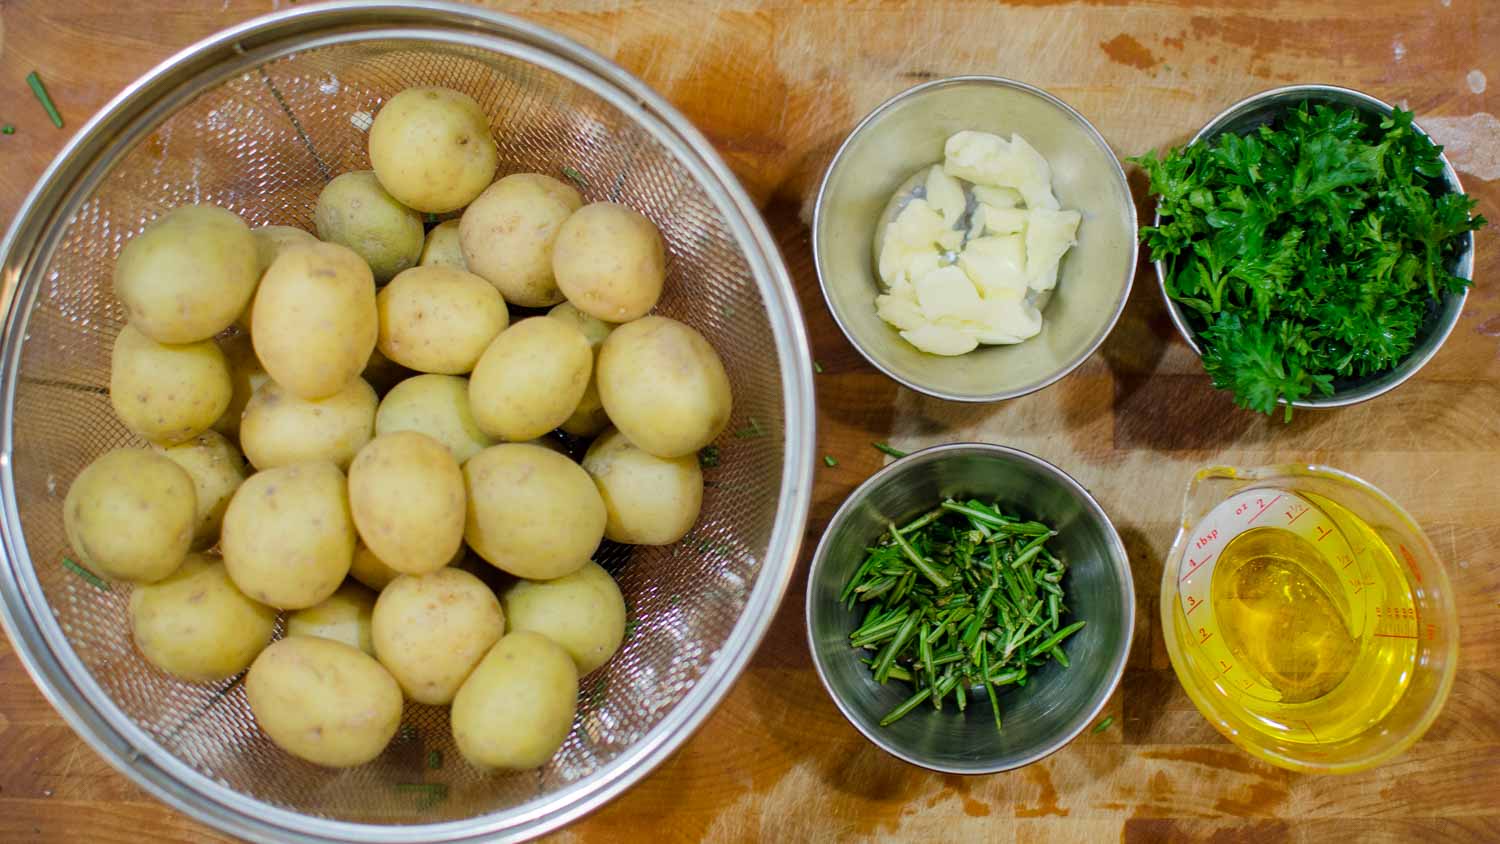 Potatoes, Garlic, Parsley, Rosemary and Olive Oil